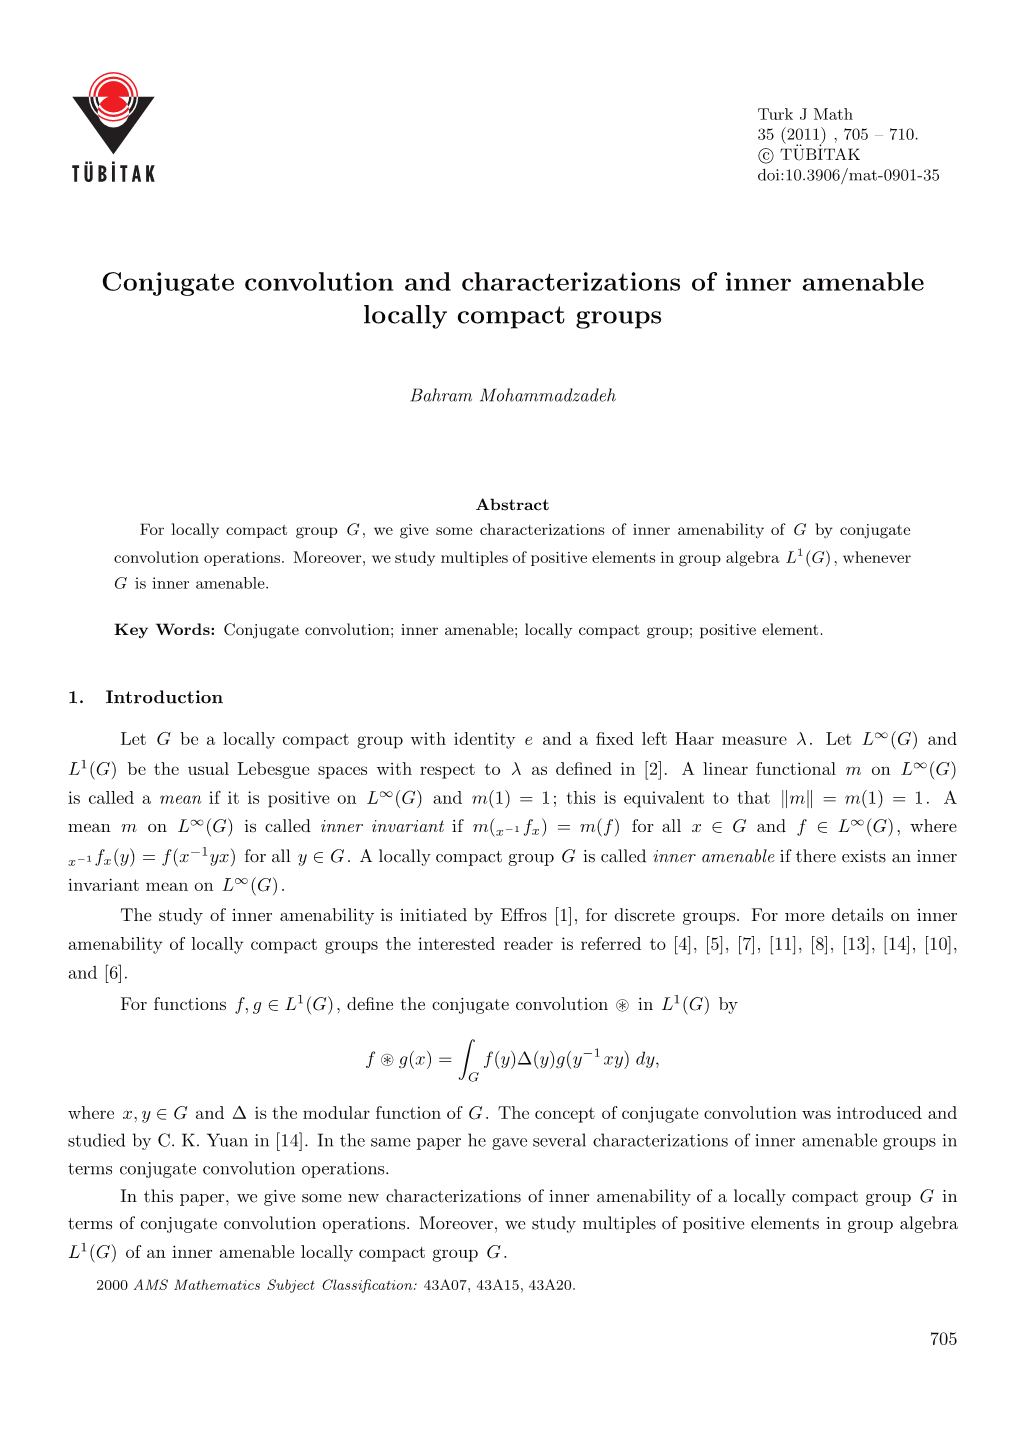 Conjugate Convolution and Characterizations of Inner Amenable Locally Compact Groups